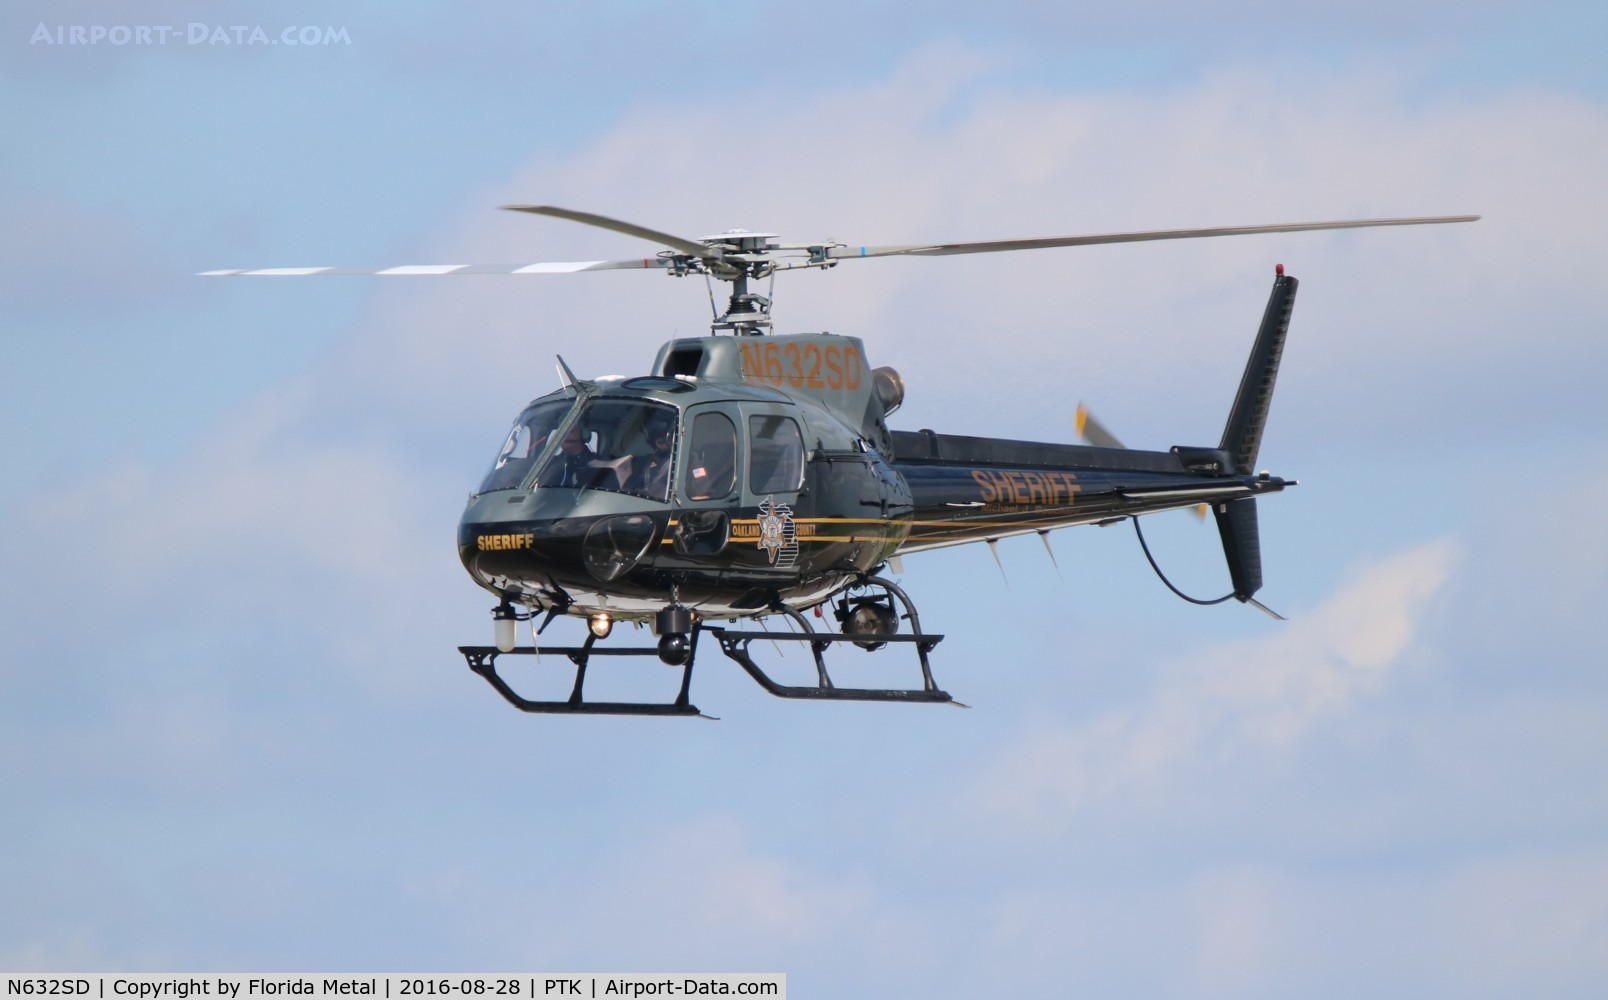 N632SD, 2002 Eurocopter AS-350B-2 Ecureuil Ecureuil C/N 3519, Oakland County